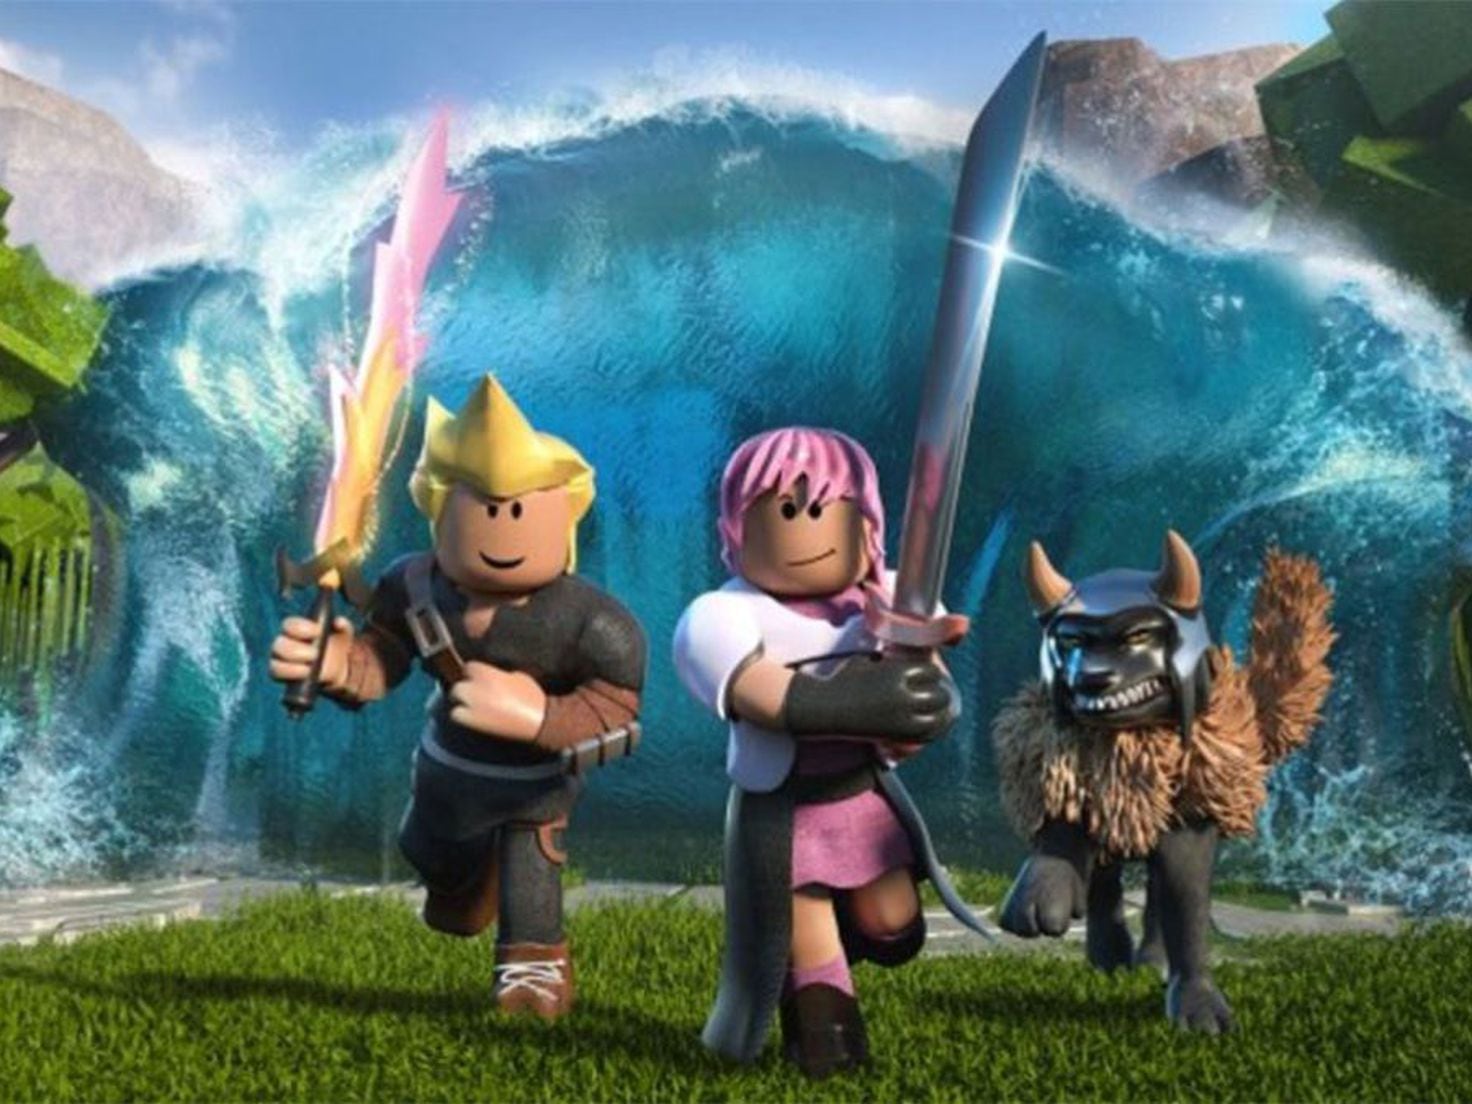 5 *NEW* Roblox Promo codes 2022 All Free ROBUX Items in March +